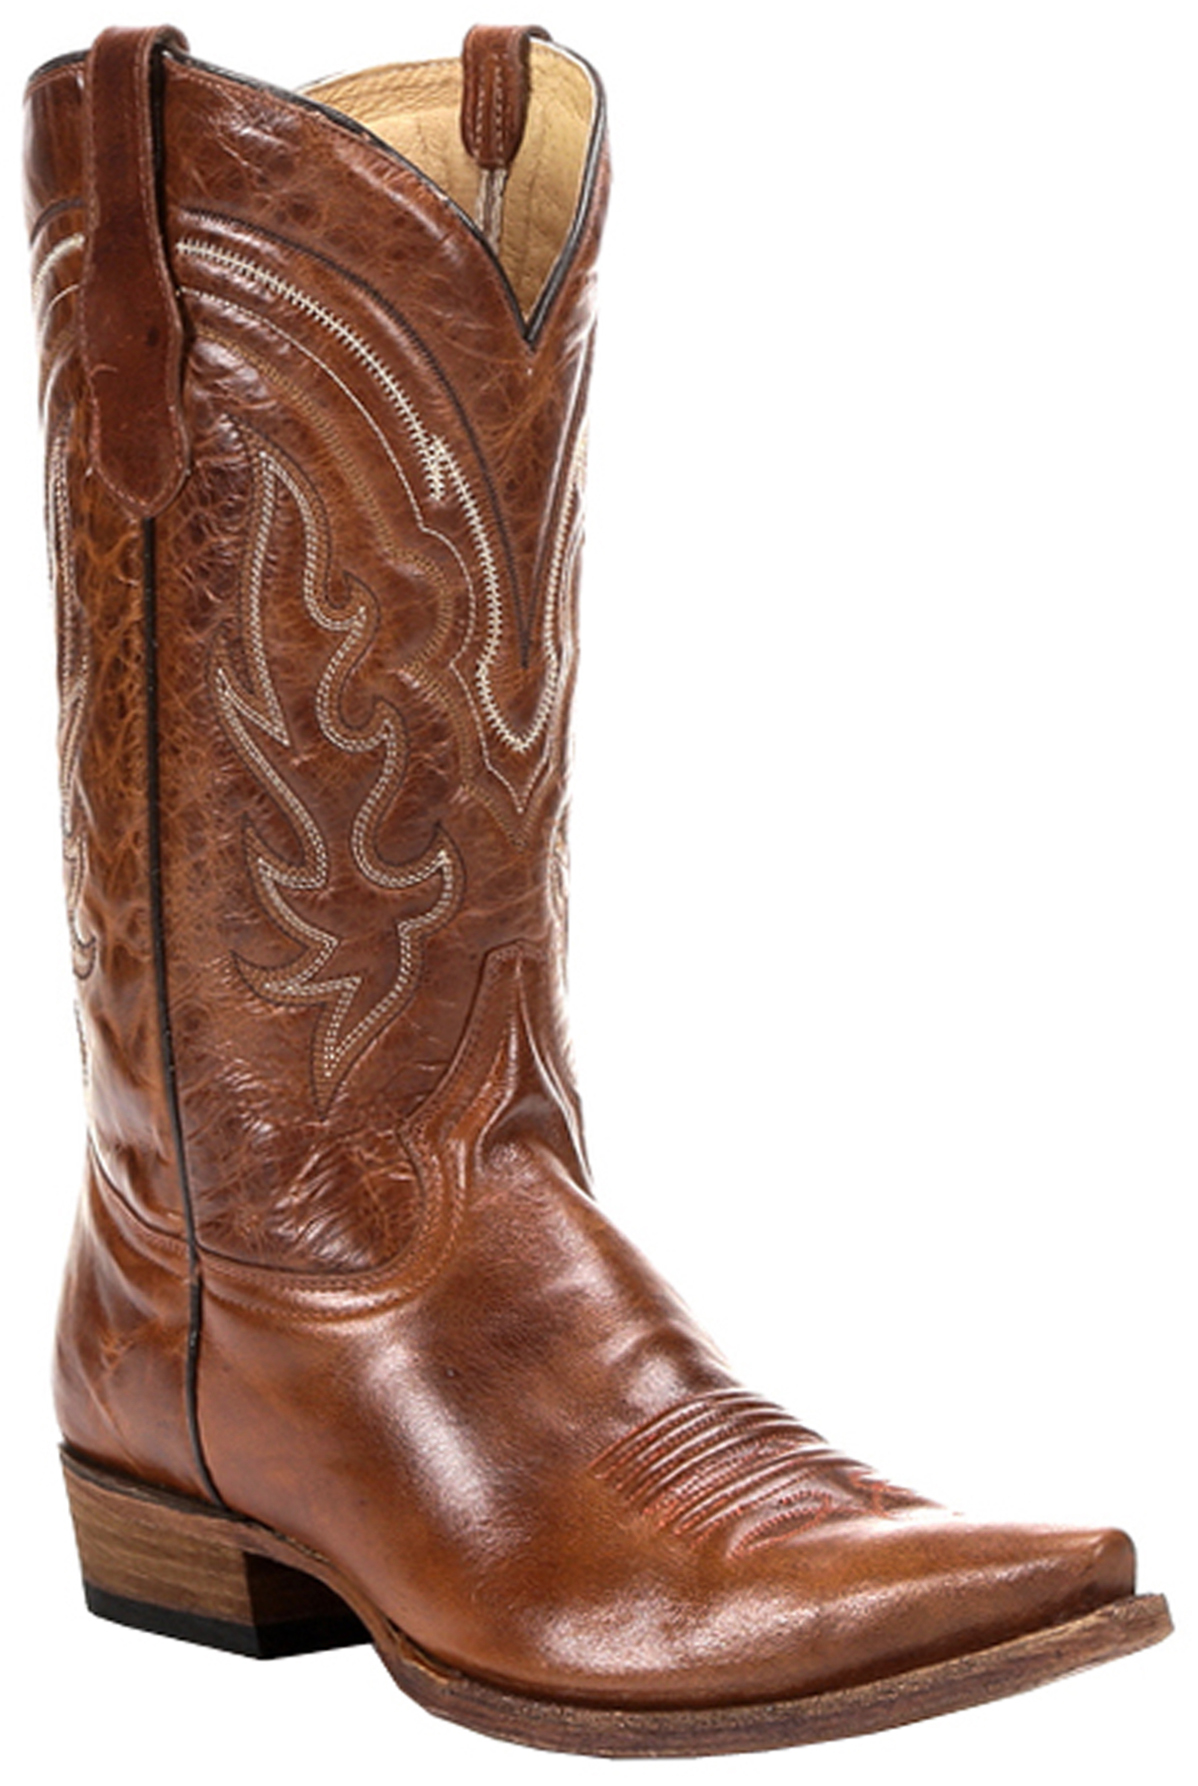 Circle G Men's Whip Stitch Cowboy Boots - Snip Toe - Country Outfitter